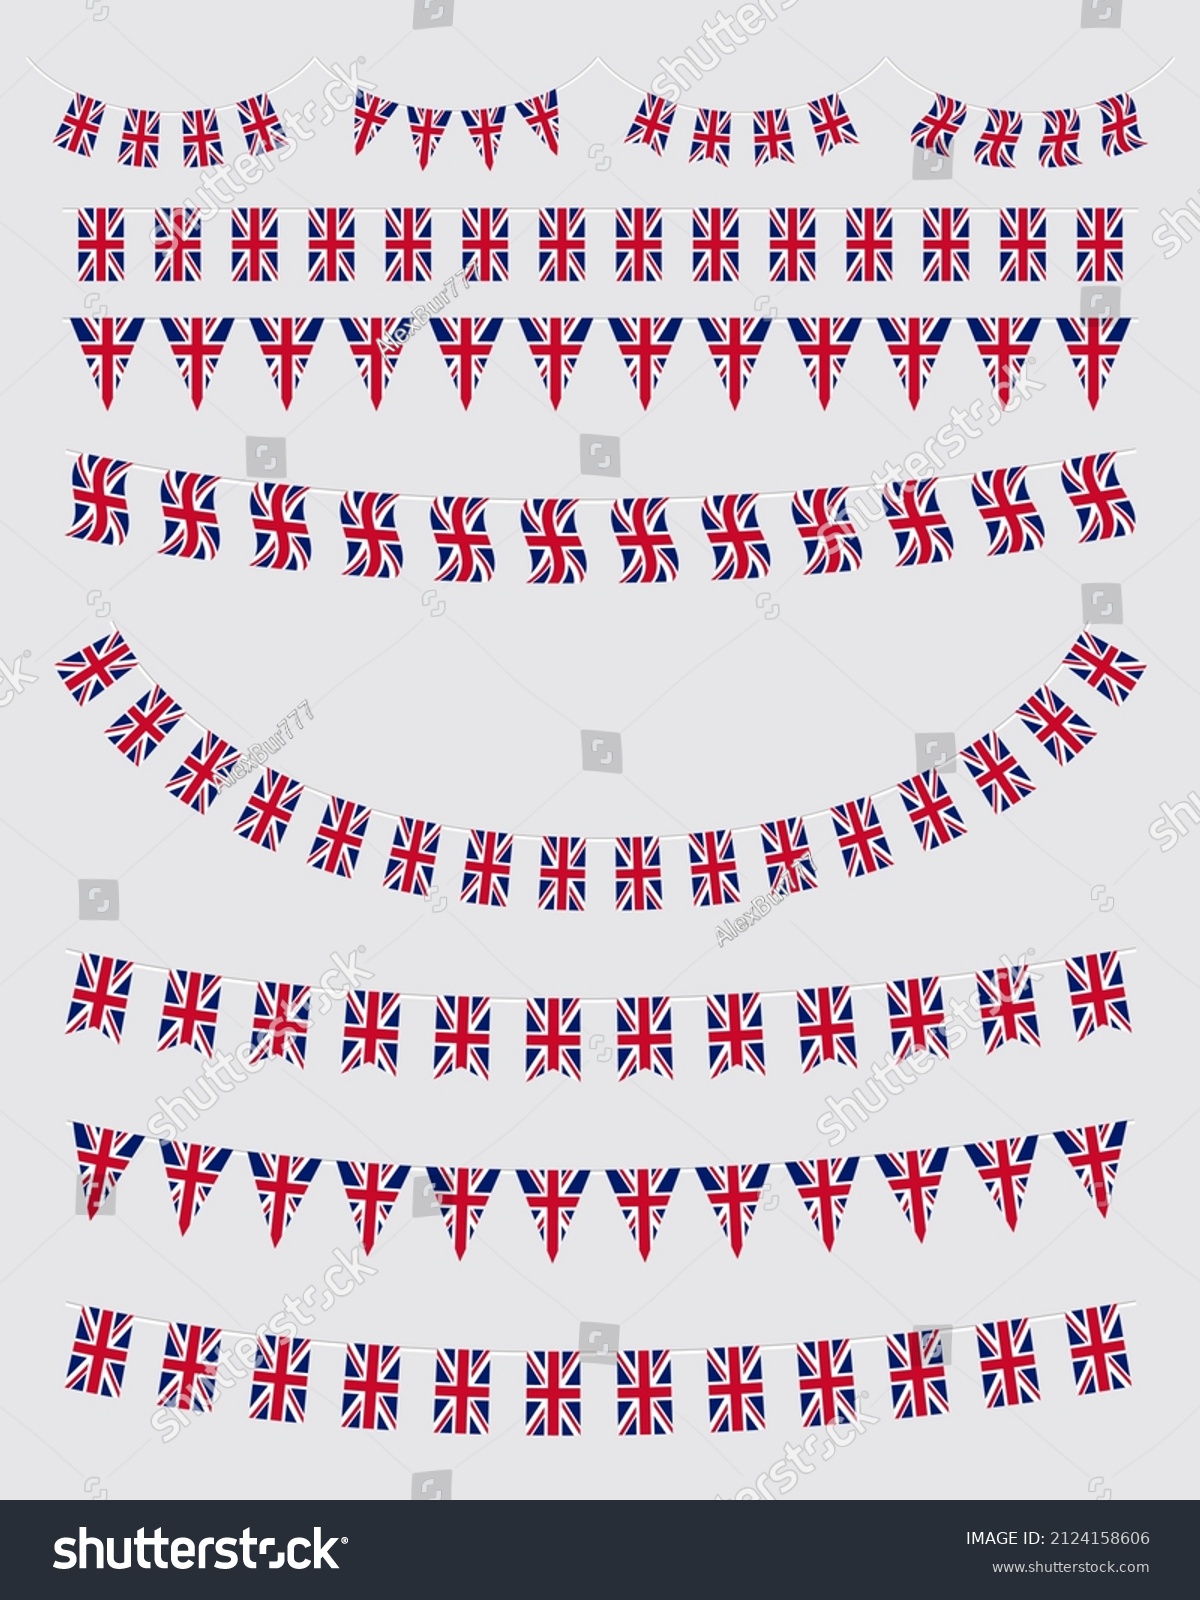 SVG of Union Jack bunting set with UK flags. United Kingdom flags garland. svg